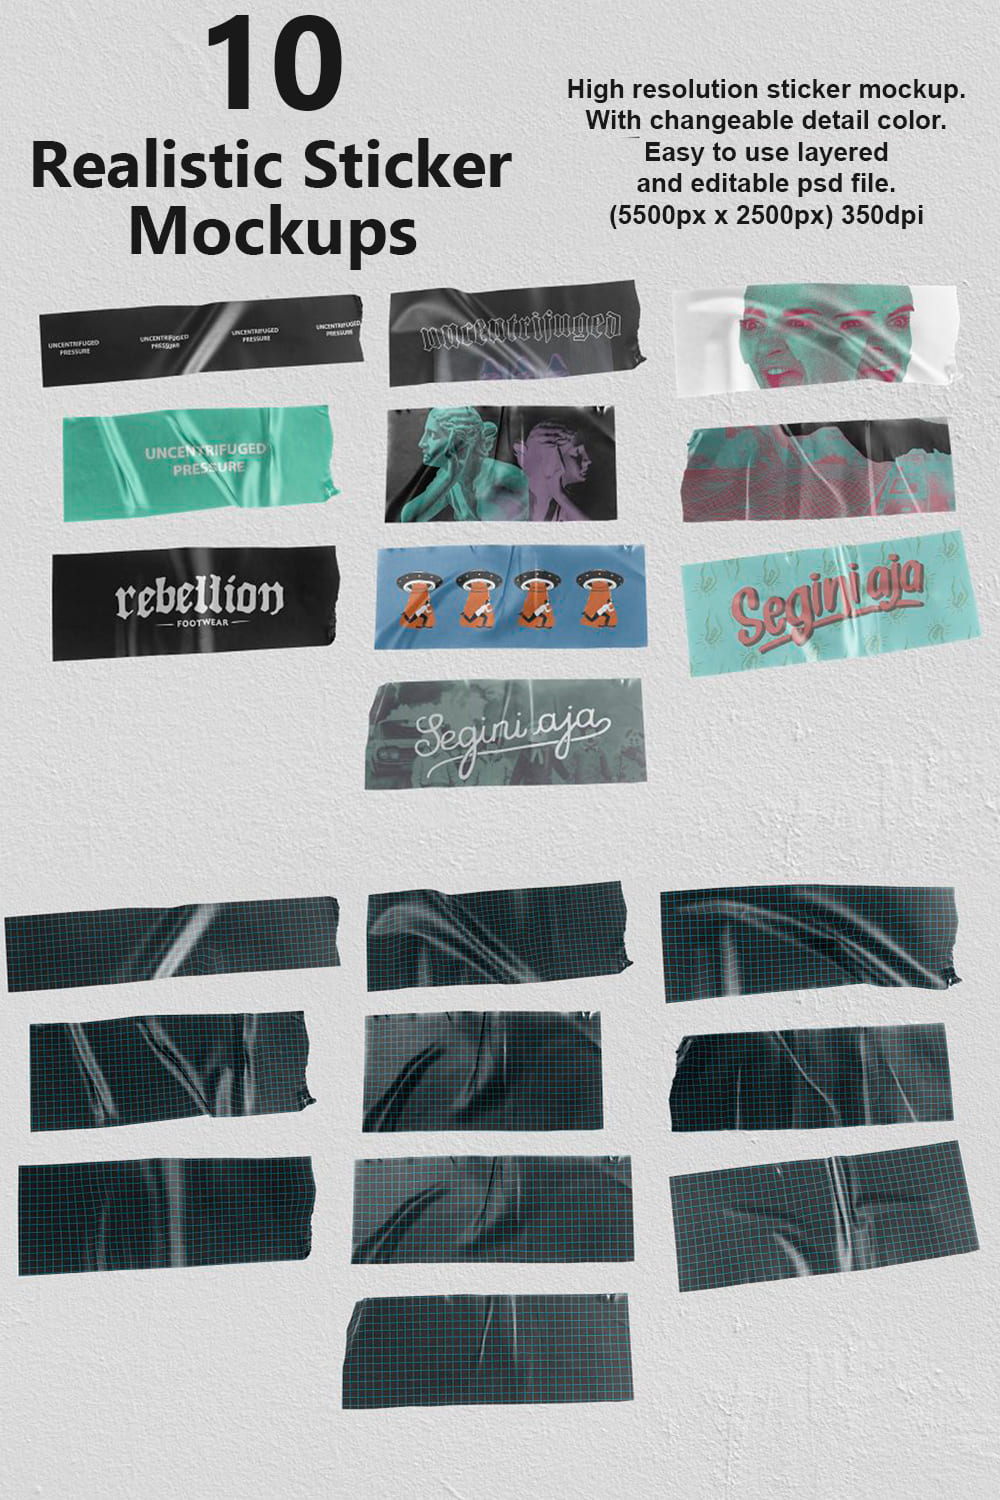 A set of images of gorgeous realistic sticker mockups.